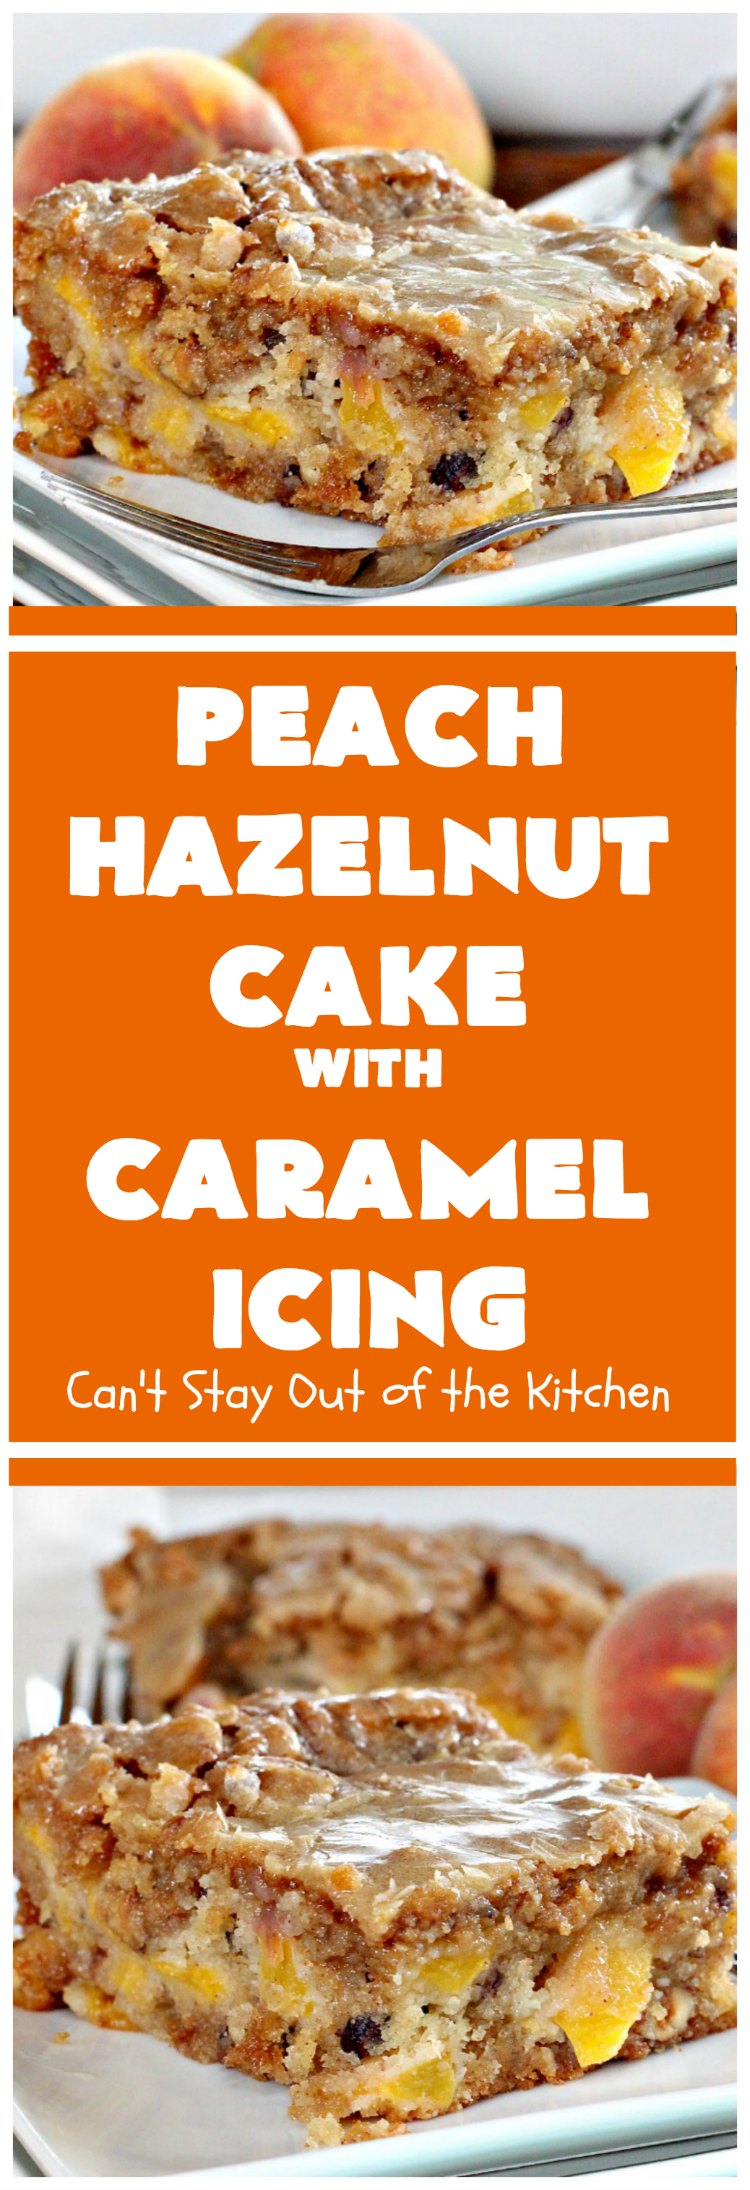 Peach Hazelnut Cake with Caramel Icing | Can't Stay Out of the Kitchen | in this fantastic #cake the #caramel icing sinks into the cake like a #pokecake. It's absolutely spectacular & the perfect #summer #dessert. #peaches #hazelnuts